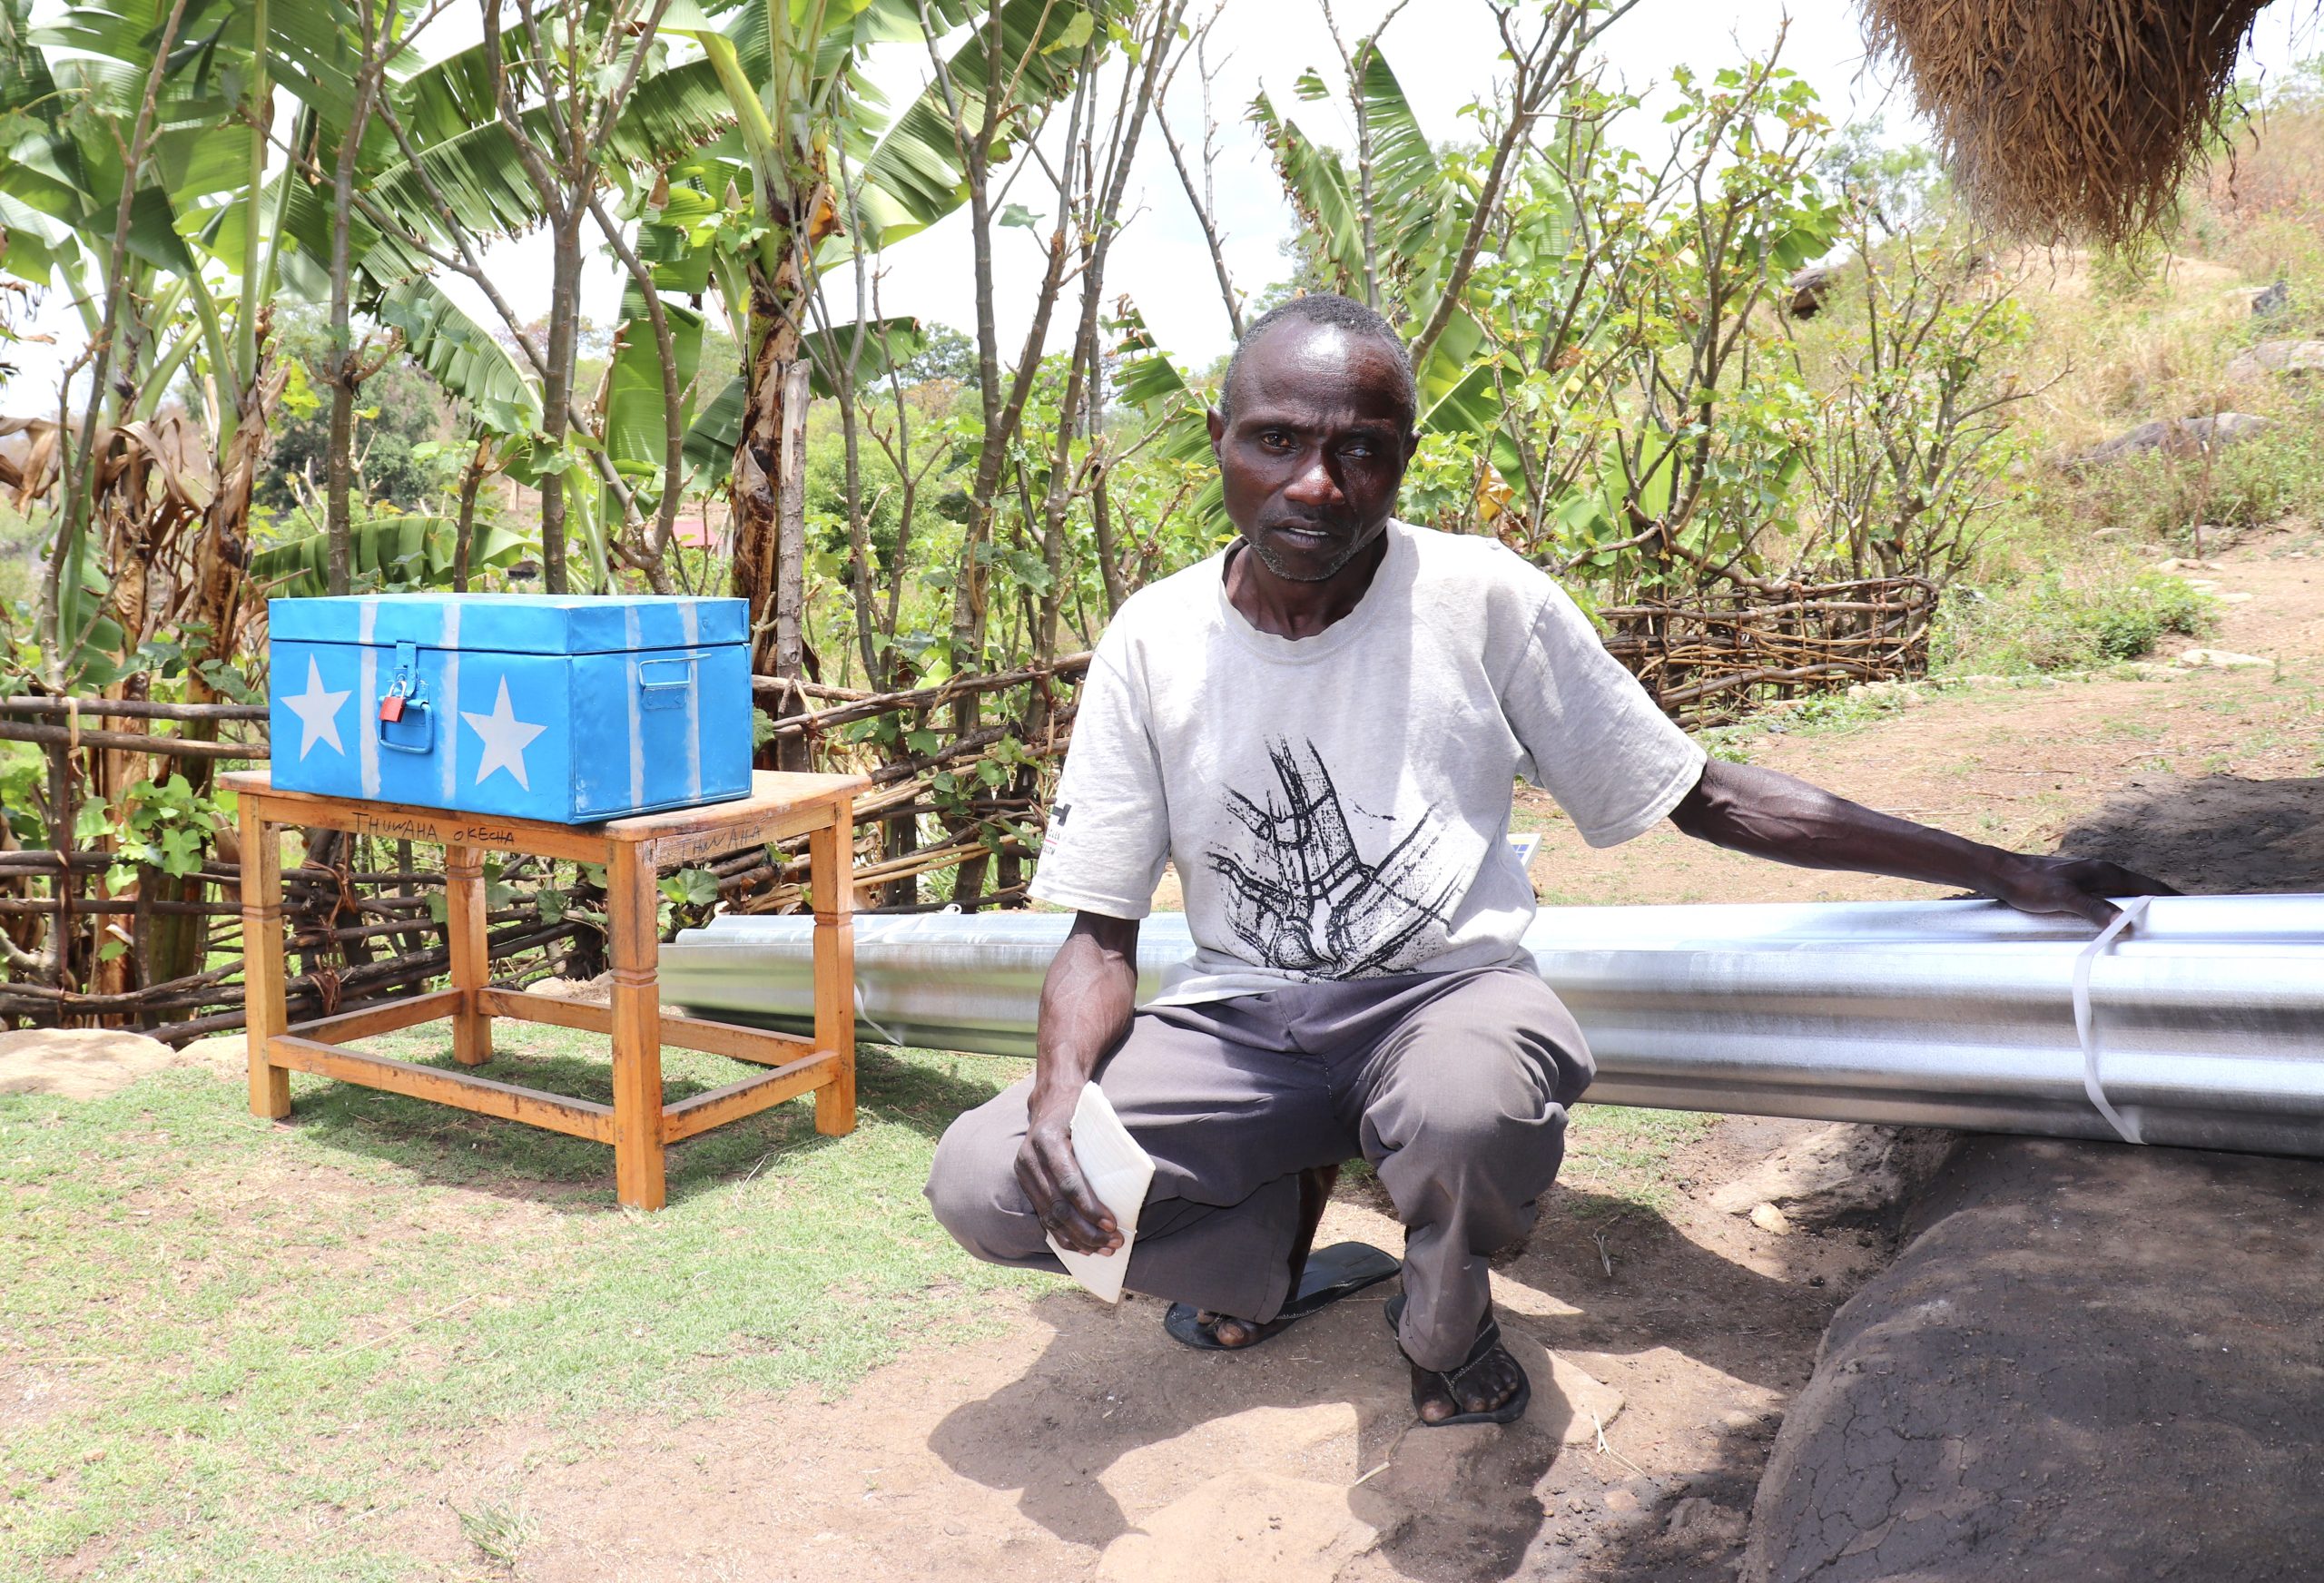 Profile 1 – Okecha has so far used part of his grant to buy iron sheets to build a new house